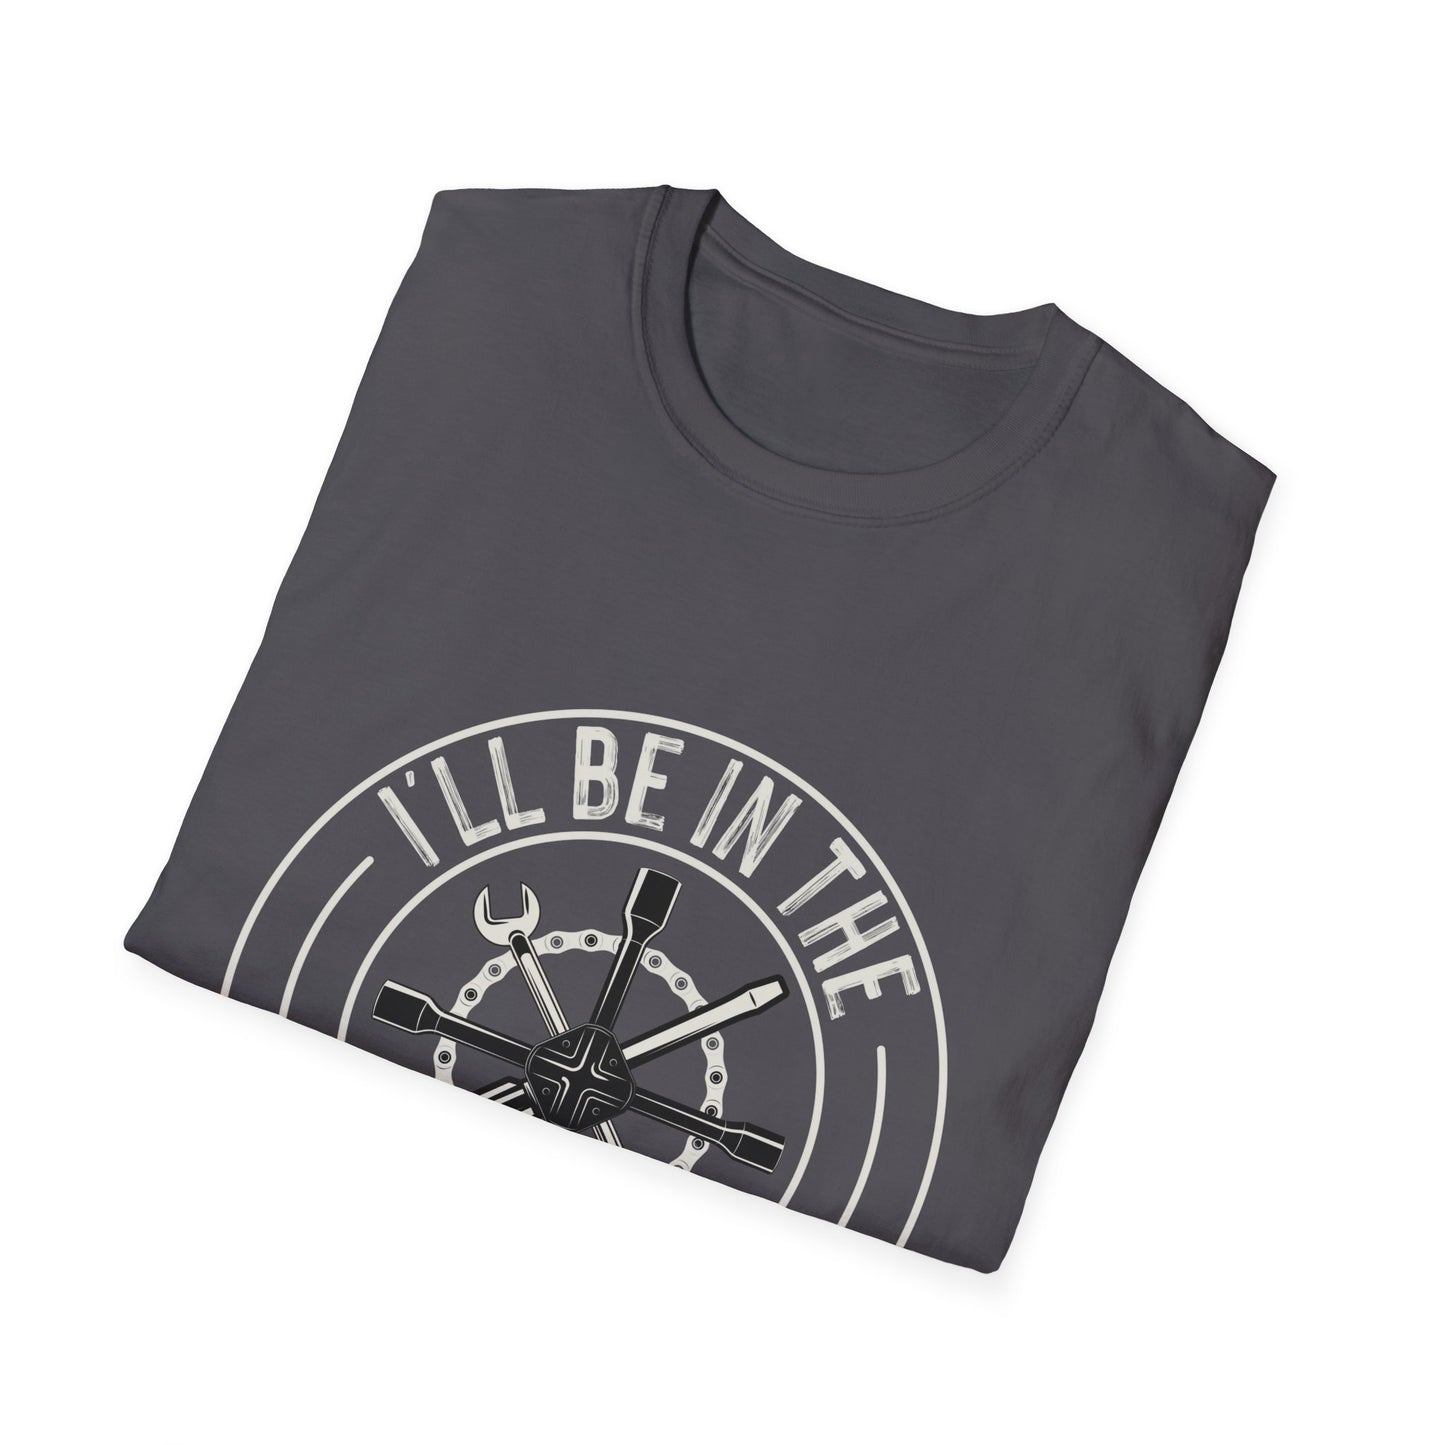 I'll be in the garage - Softstyle T-Shirt